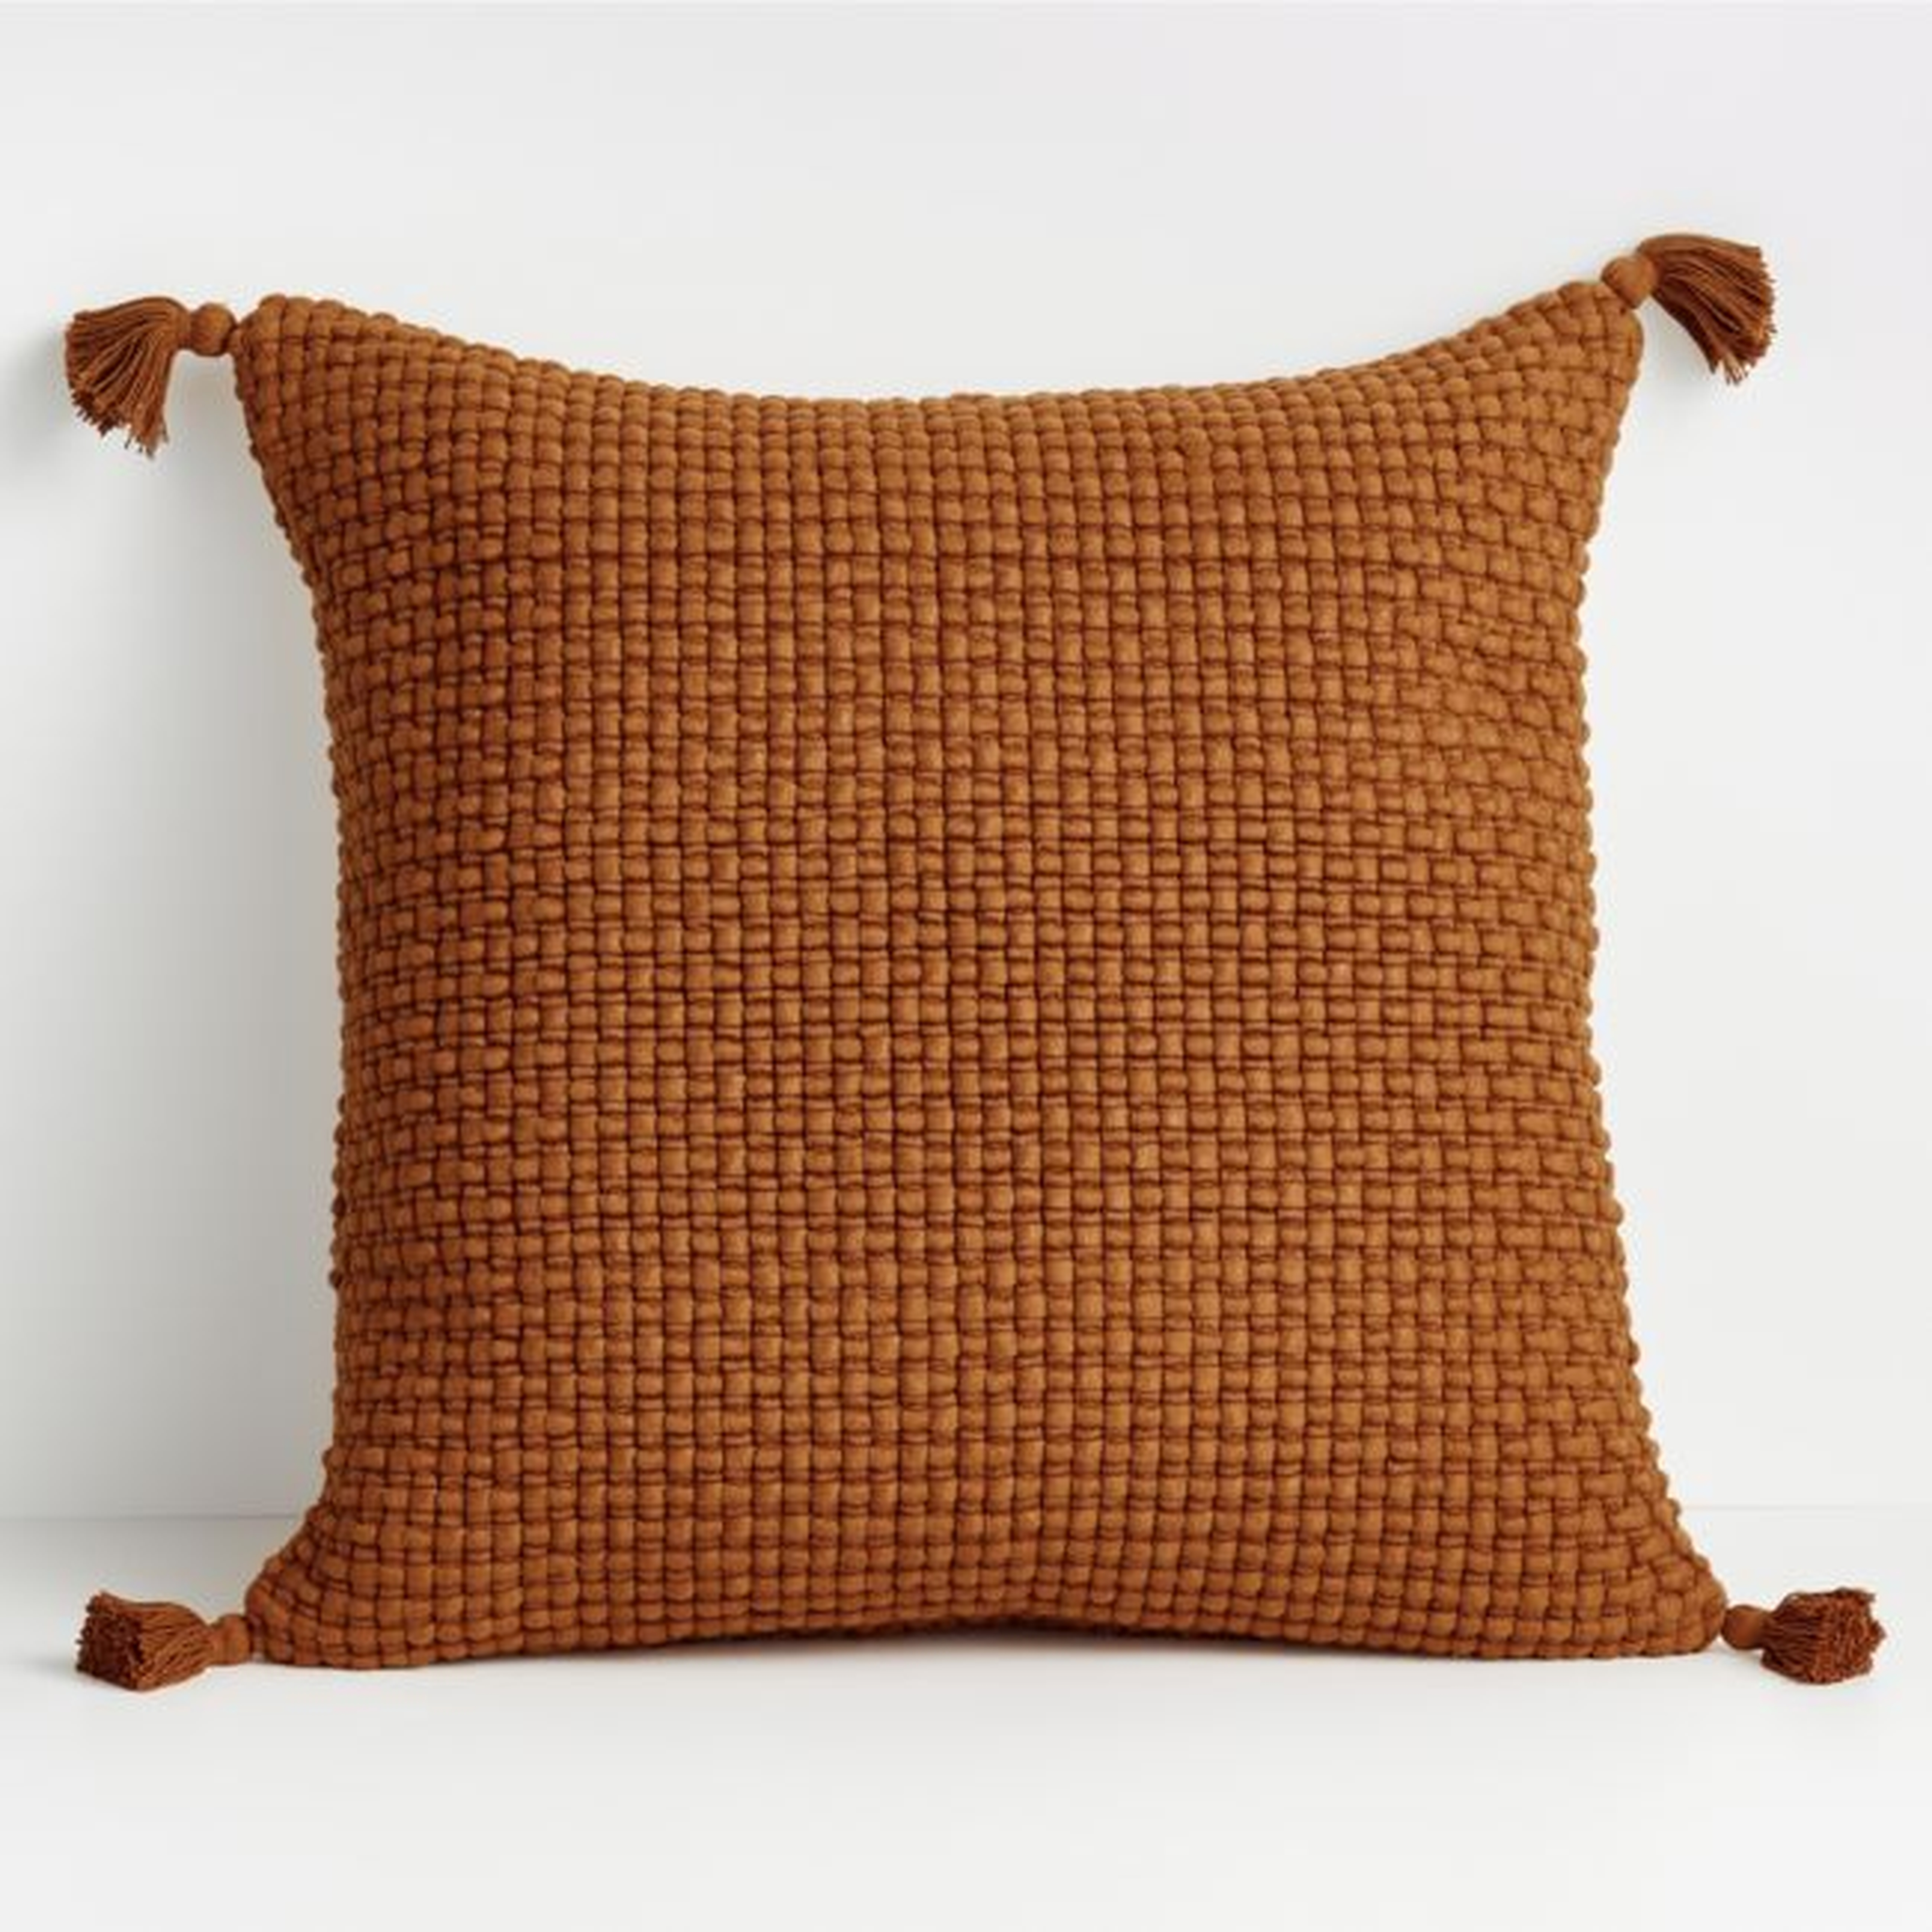 Elna 23" Rugby Tan Fringed Pillow with Down-Alternative Insert - Crate and Barrel